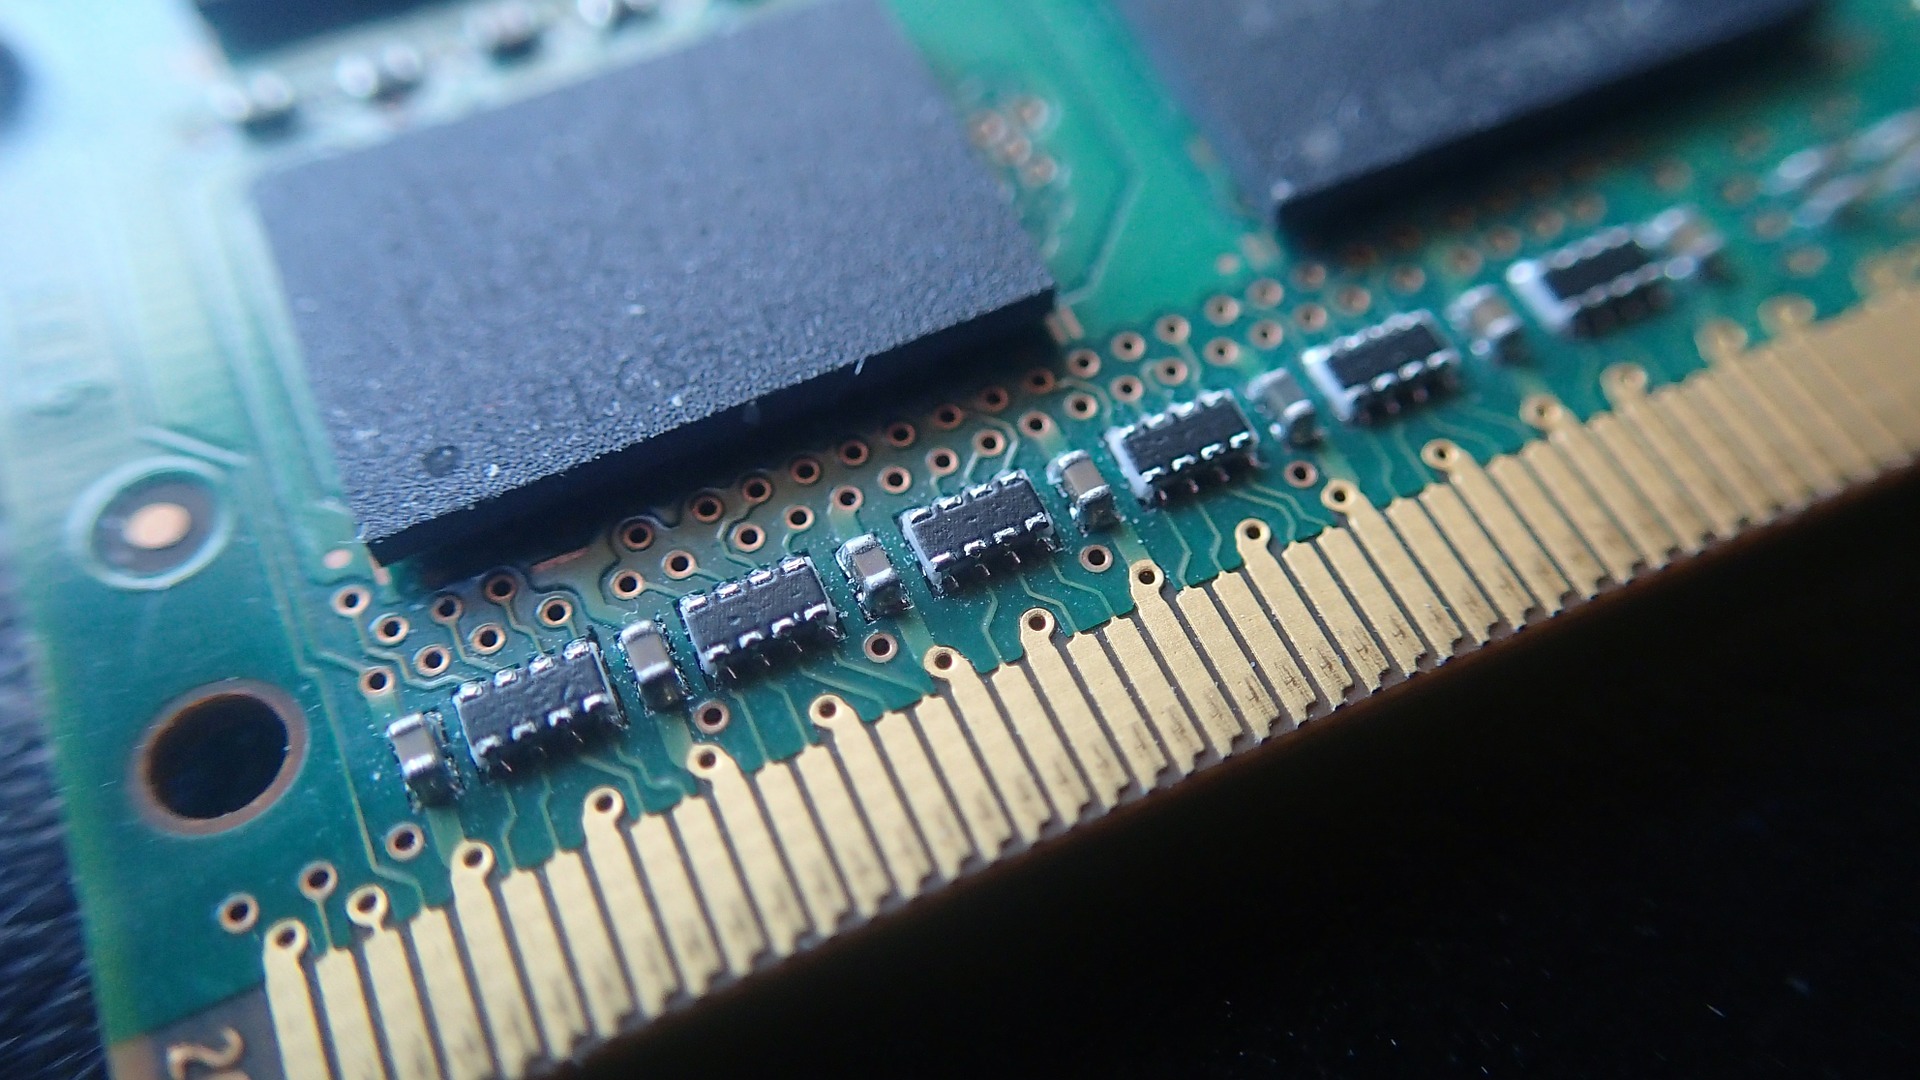 a close up view of a computer memory chip